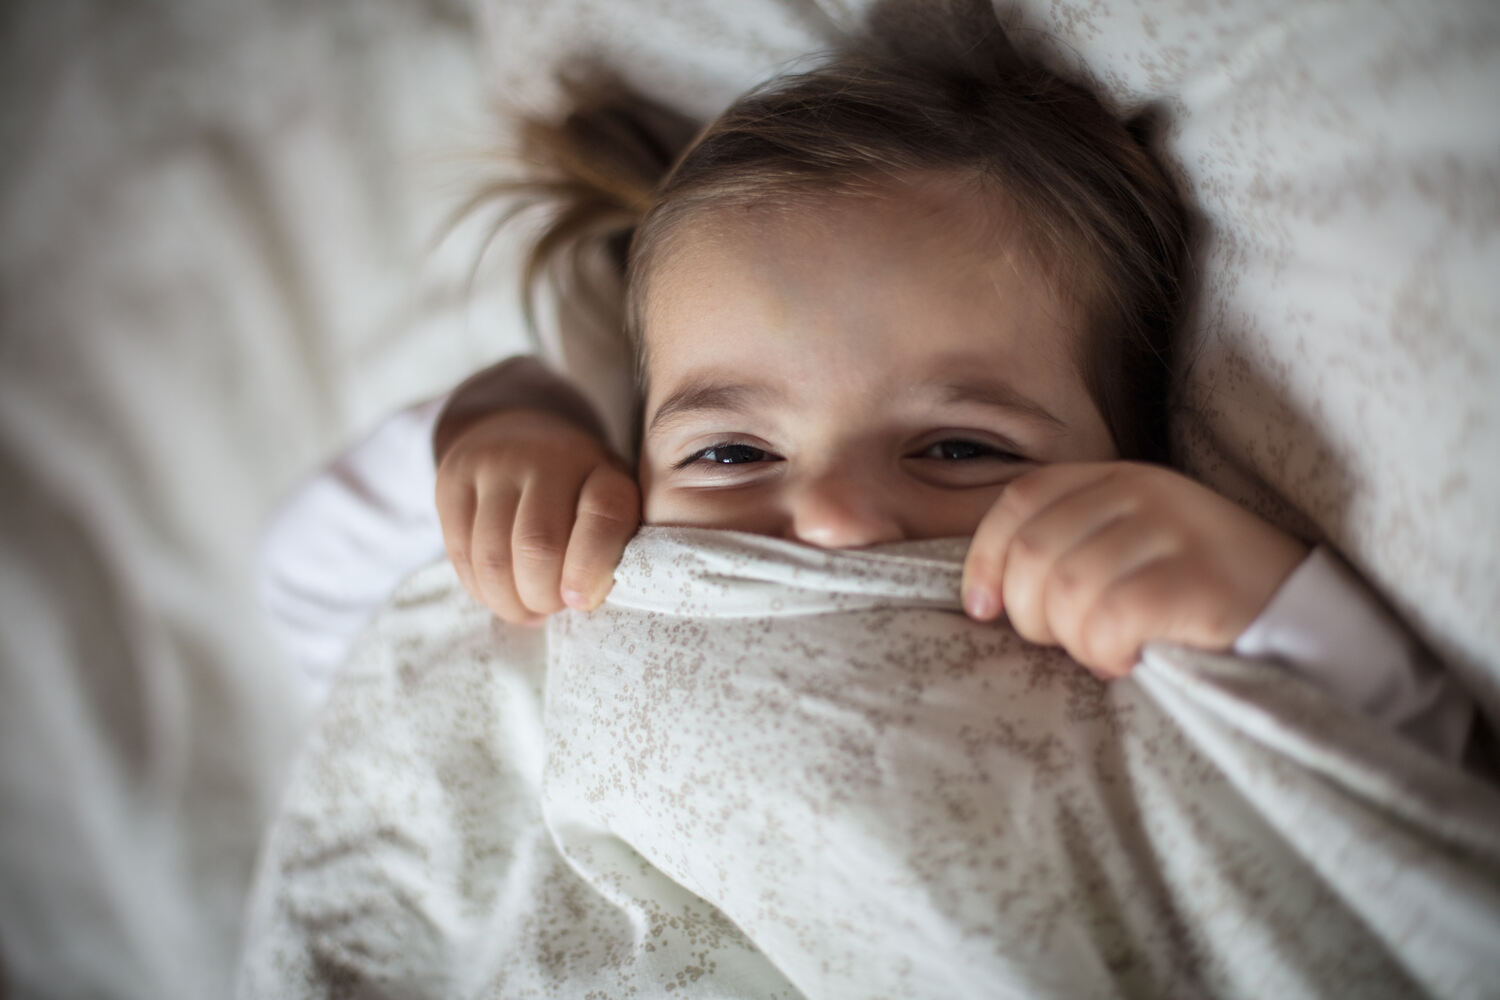 Toddlers can stop napping due to several reasons